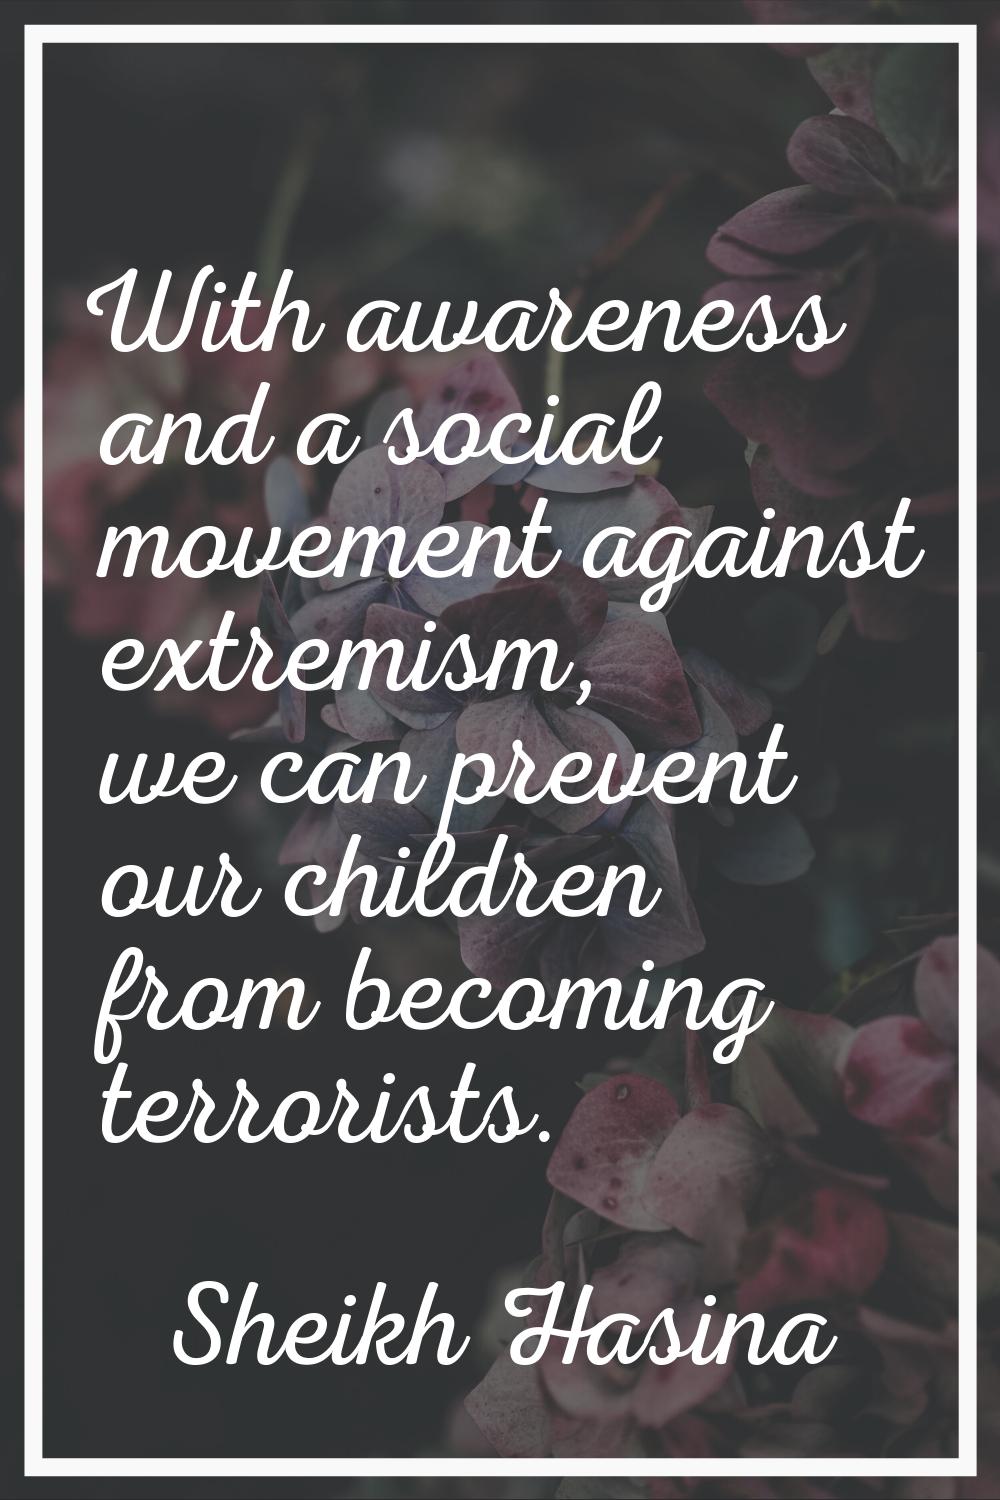 With awareness and a social movement against extremism, we can prevent our children from becoming t